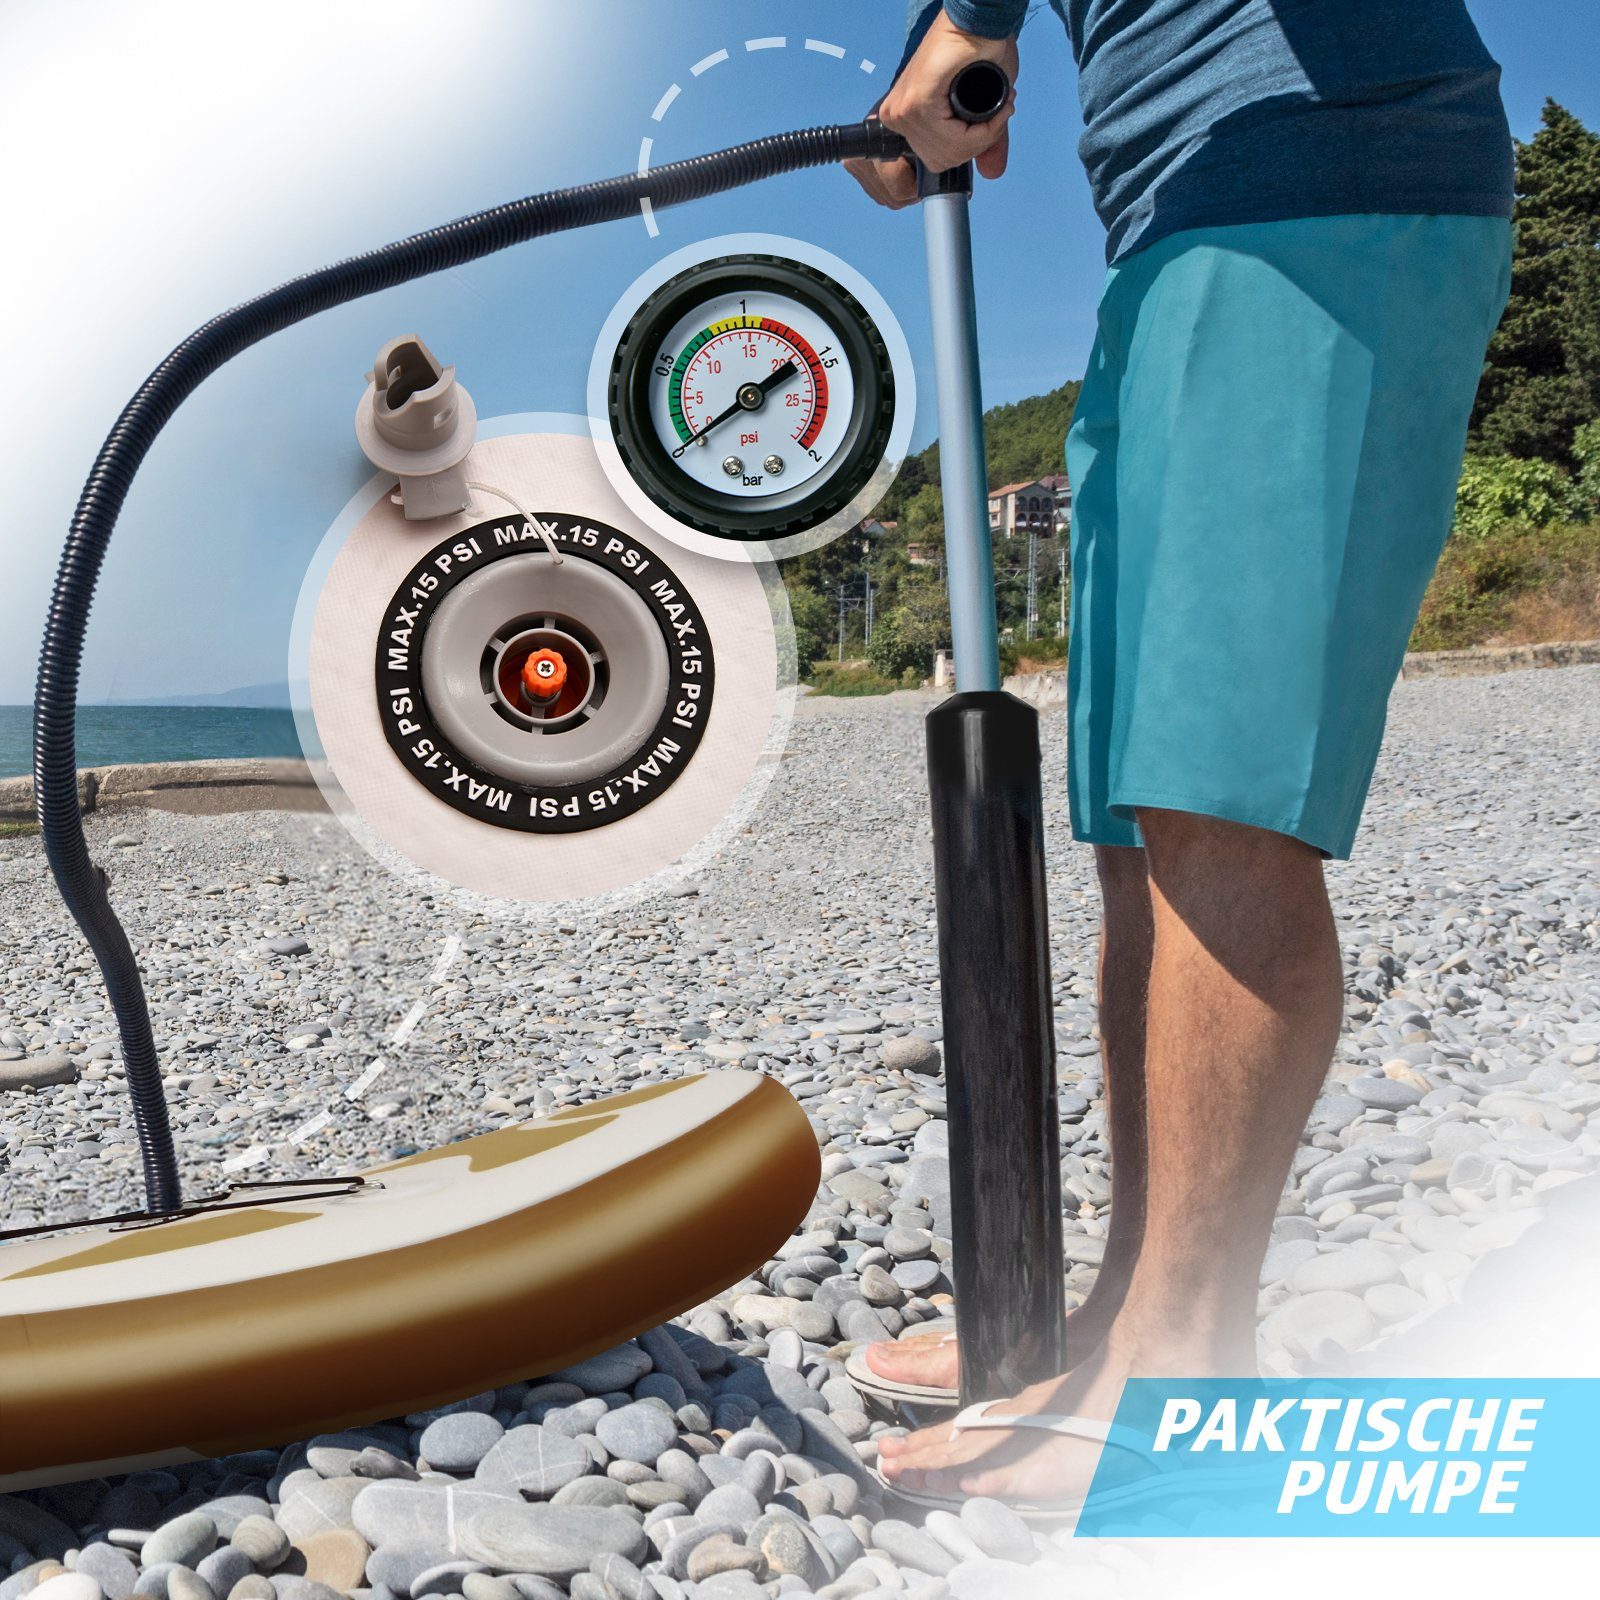 Paddle Board Board Physionics Stand Bastet(Gold) Up SUP 305cm Aufblasbares SUP-Board